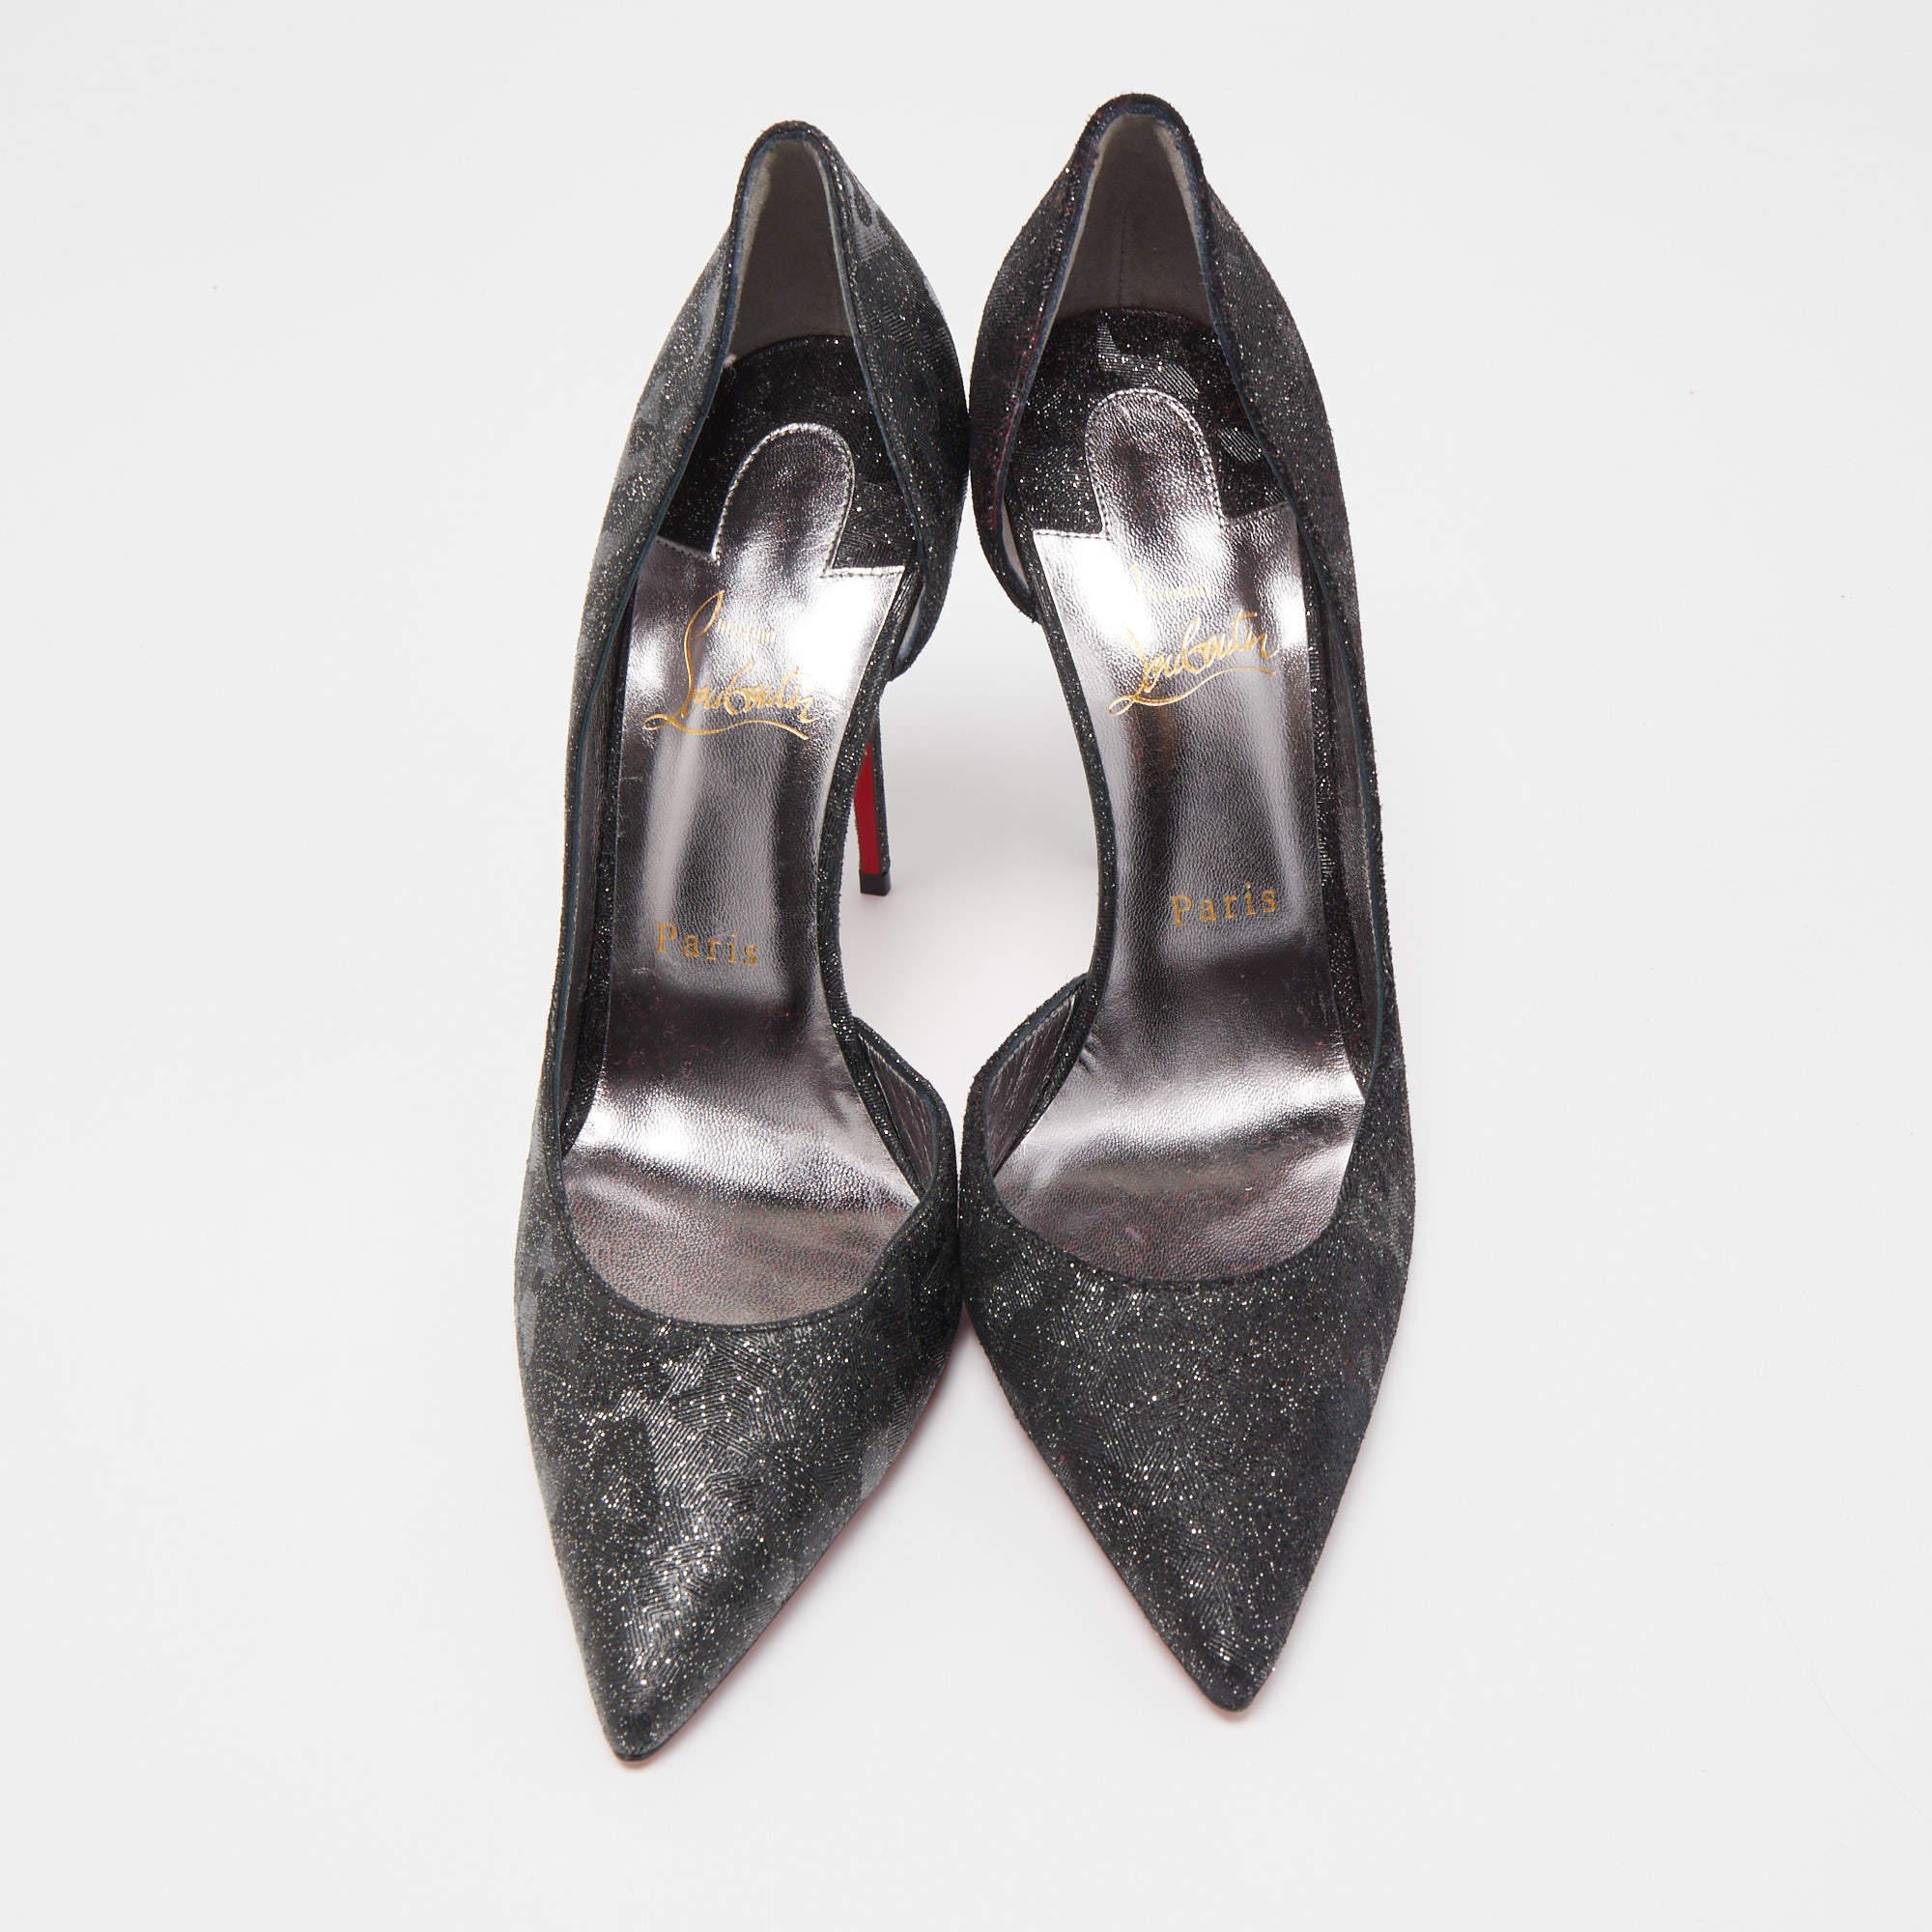 Skilfully crafted from glitter in a D'orsay style with pointed toes, these Christian Louboutin pumps come ready to give you a high-fashion experience. The black glitter pumps, with sharp-cut toplines, are balanced on slim heels and finished with red